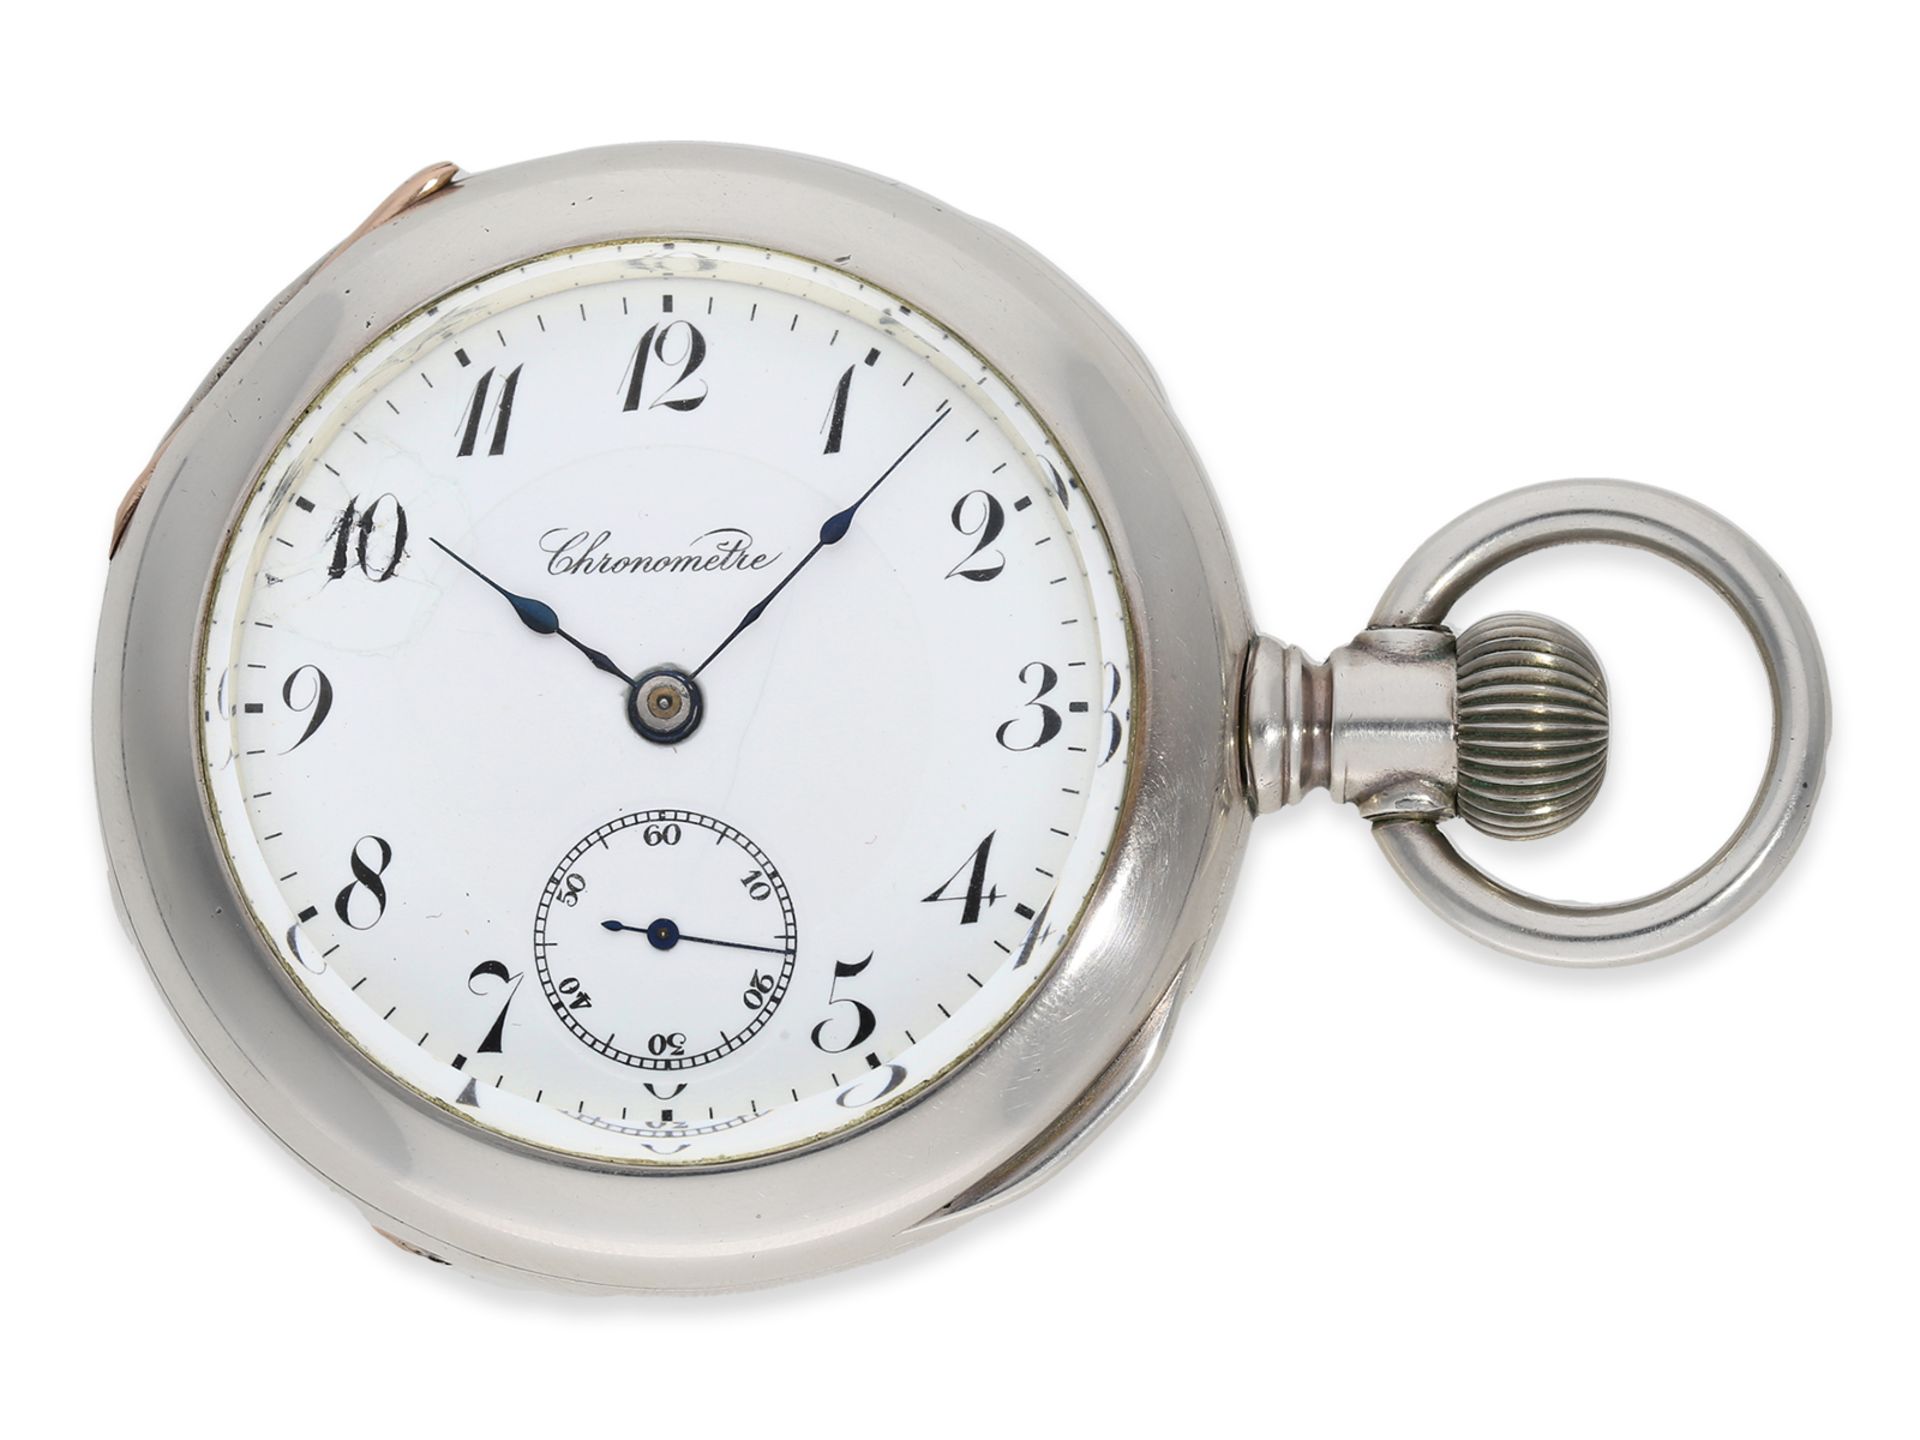 Pocket watch: extremely heavy Swiss pivoted detent chronometer for the American market, ca. 1890